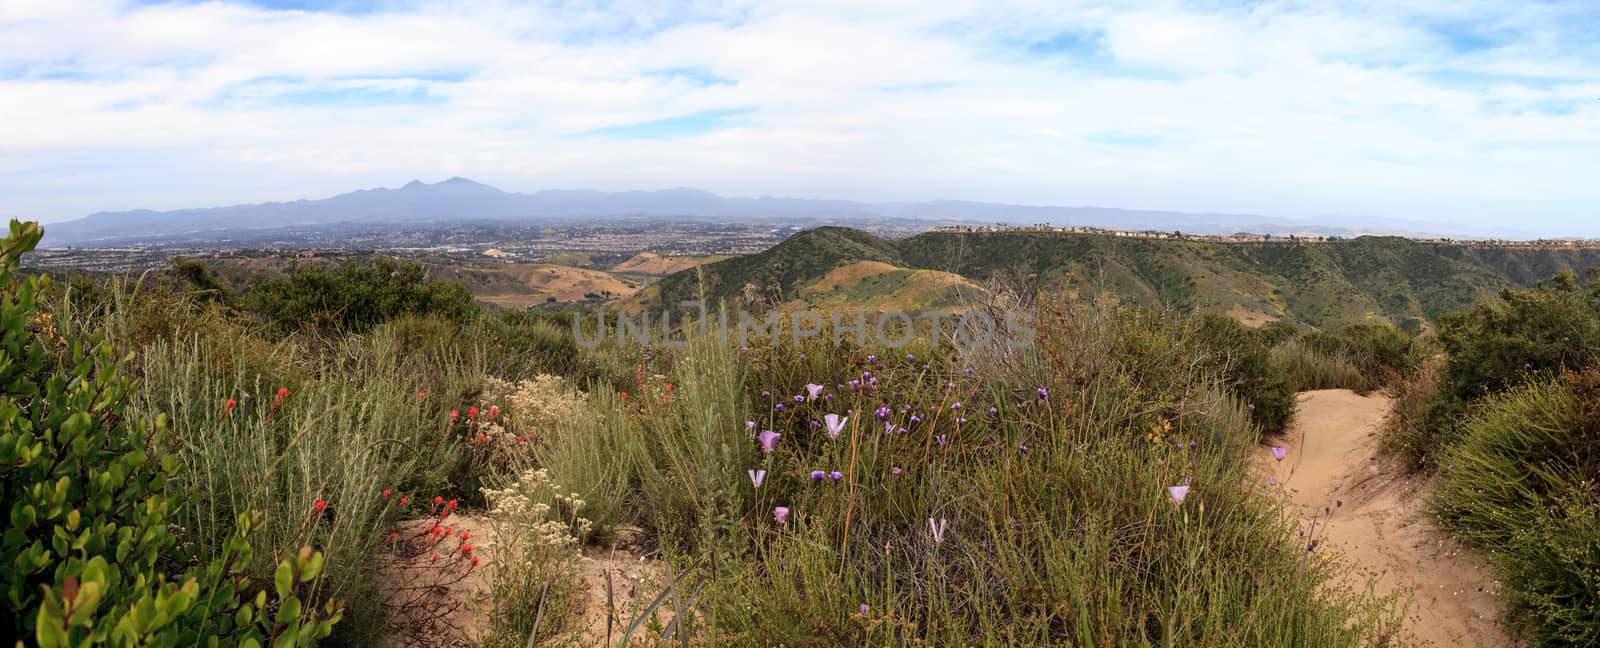 Aliso and Wood Canyons Wilderness Park hiking paths in Laguna Beach, California in spring